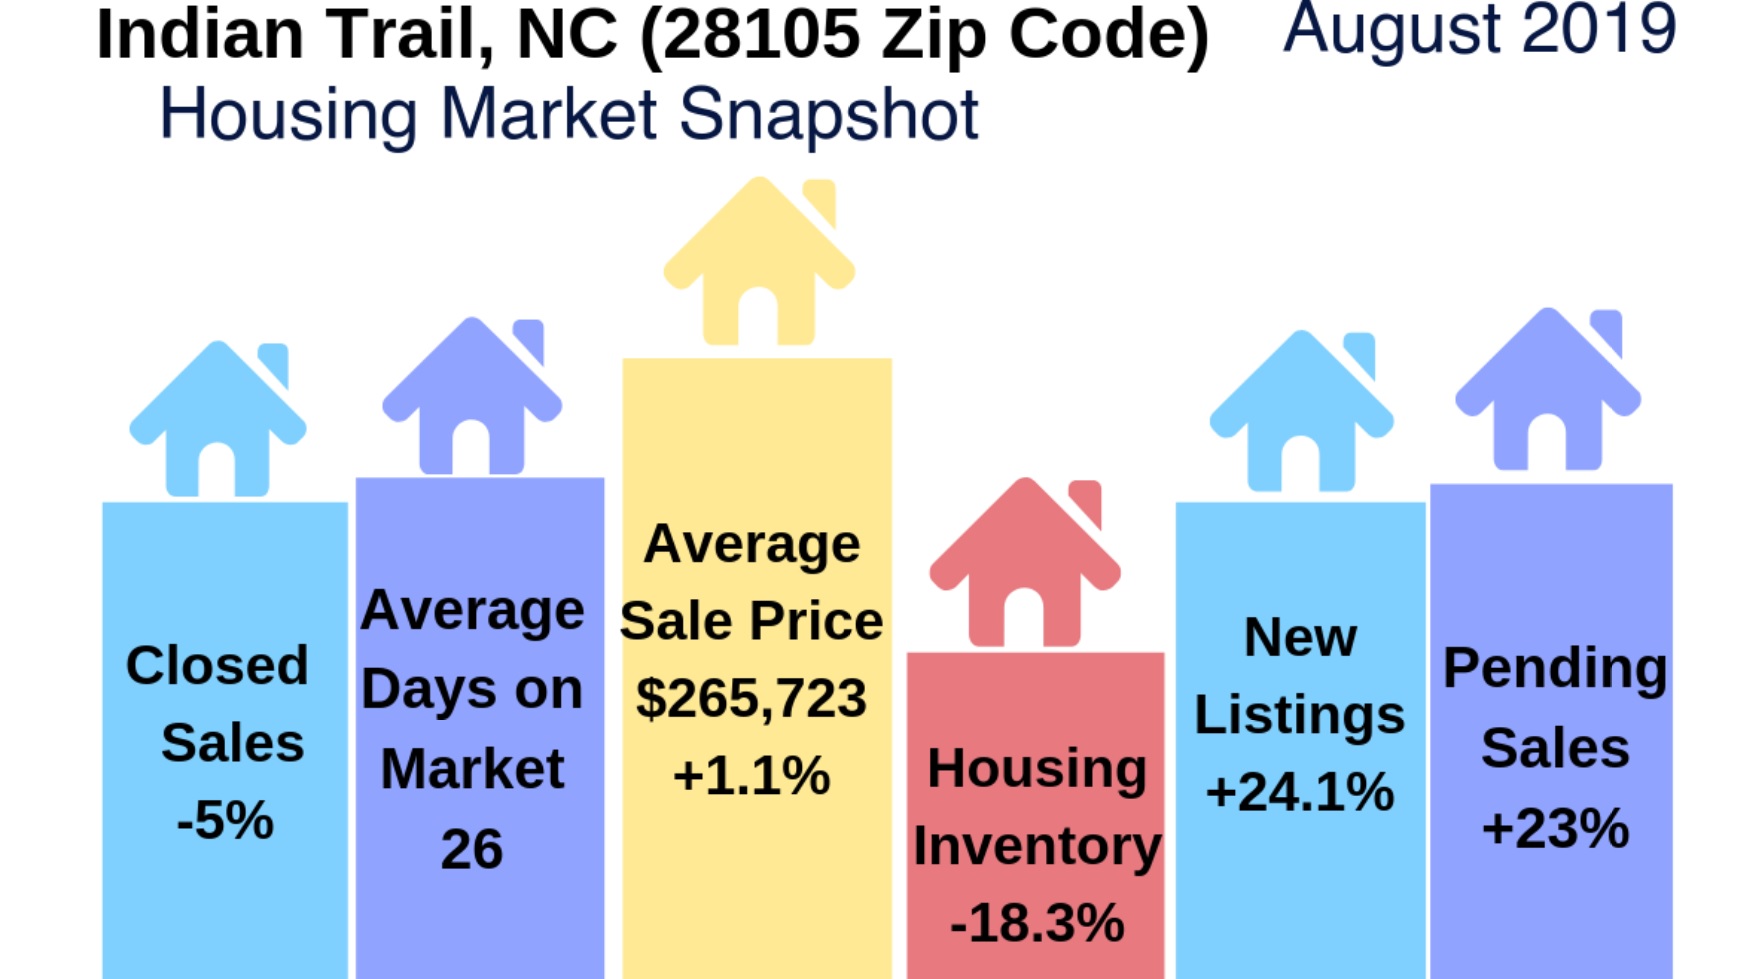 Indian Trail (29079 Zip Code) Real Estate Report: August 2019